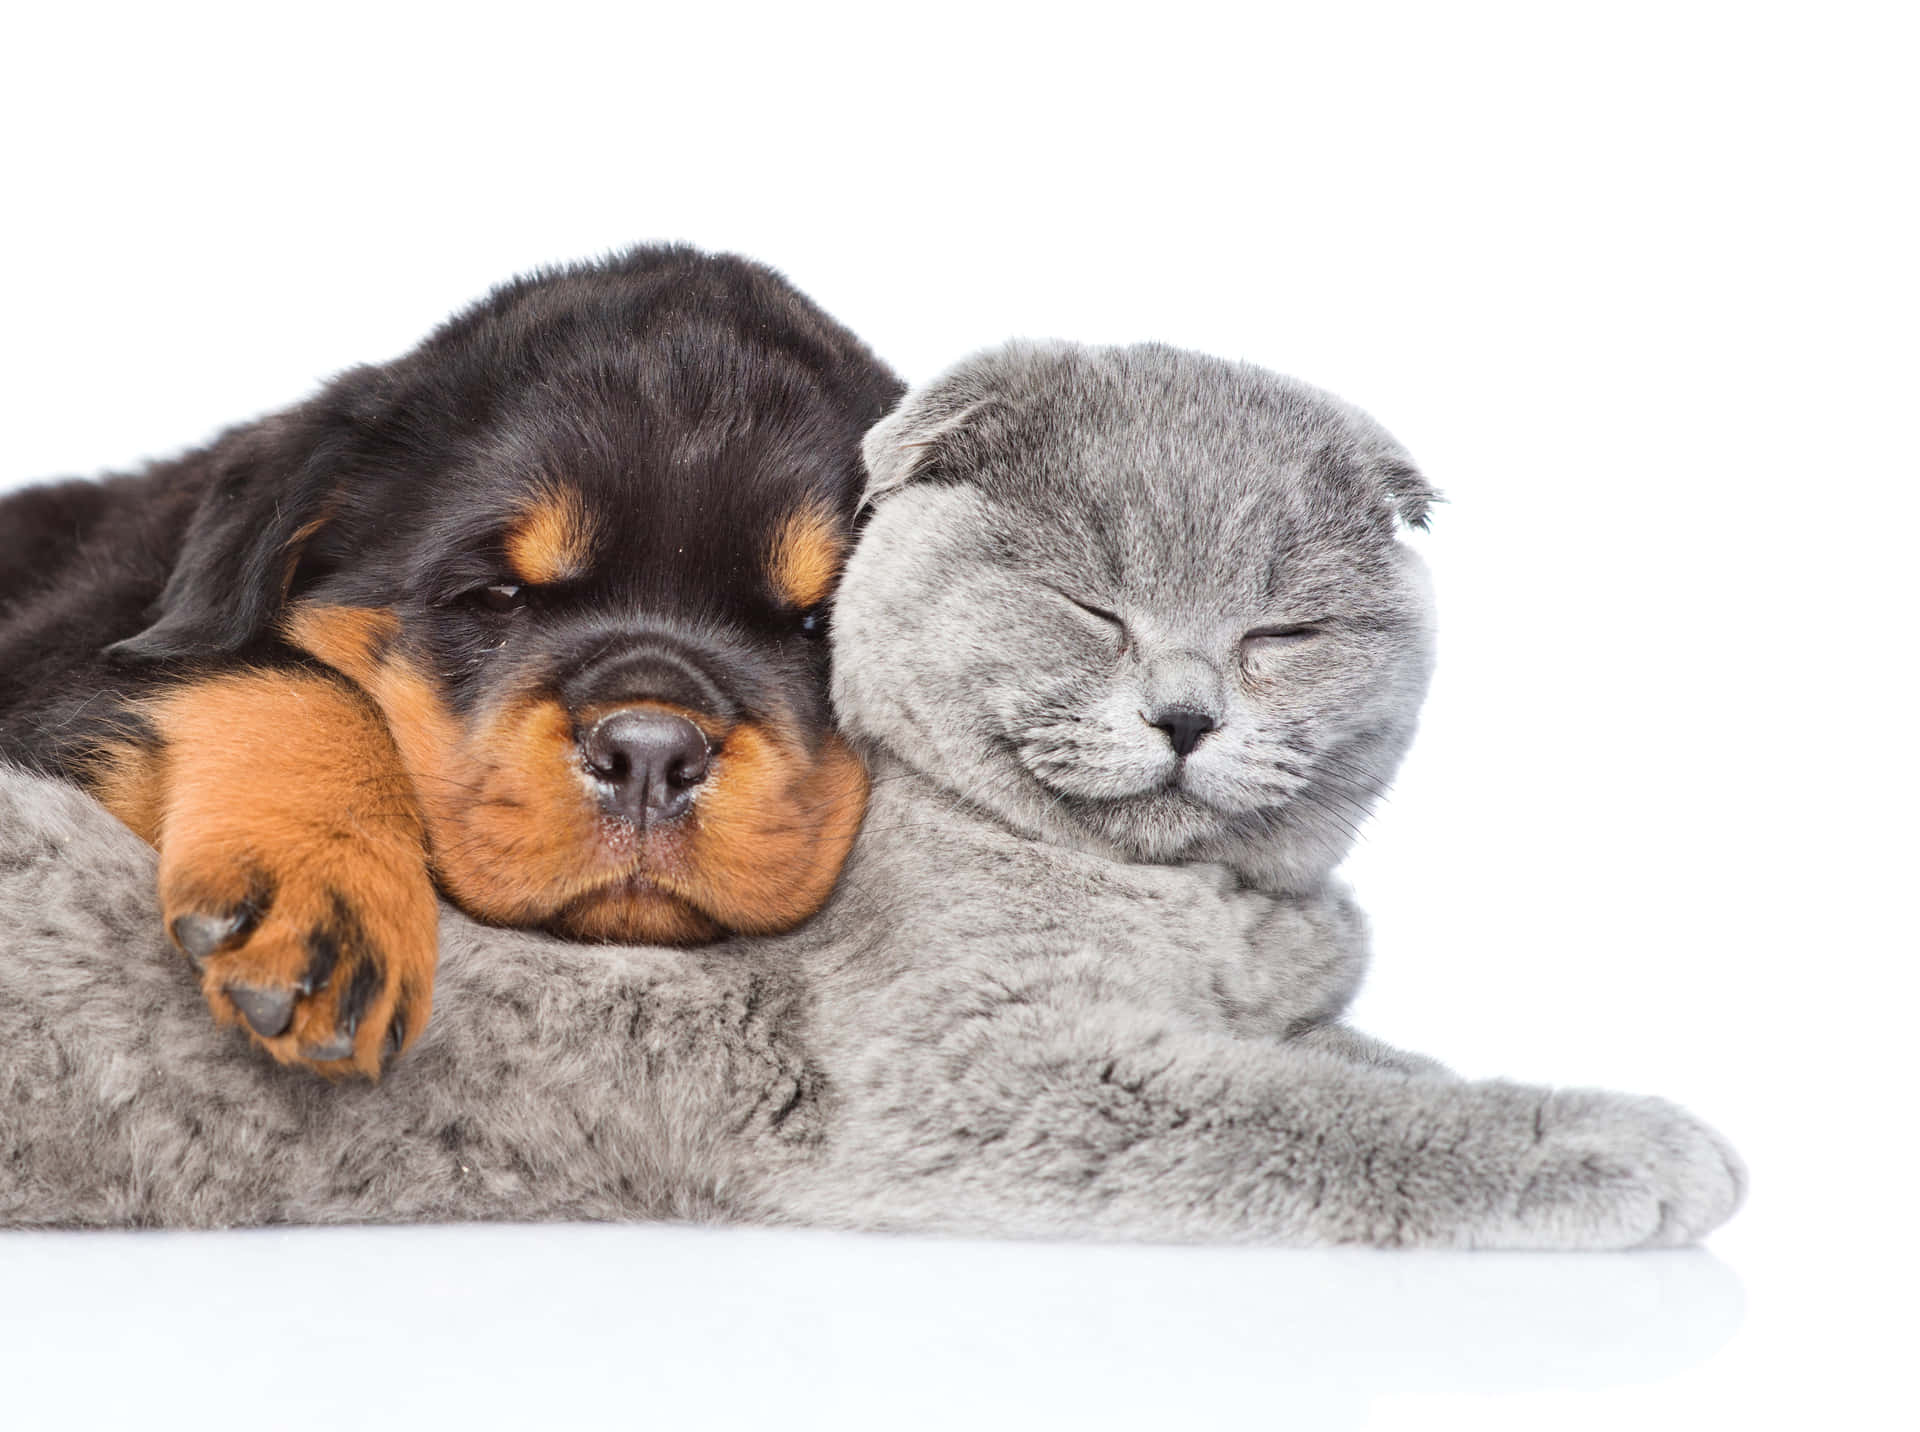 “Two of the Best Friends Ever: A Kitten and a Puppy” Wallpaper